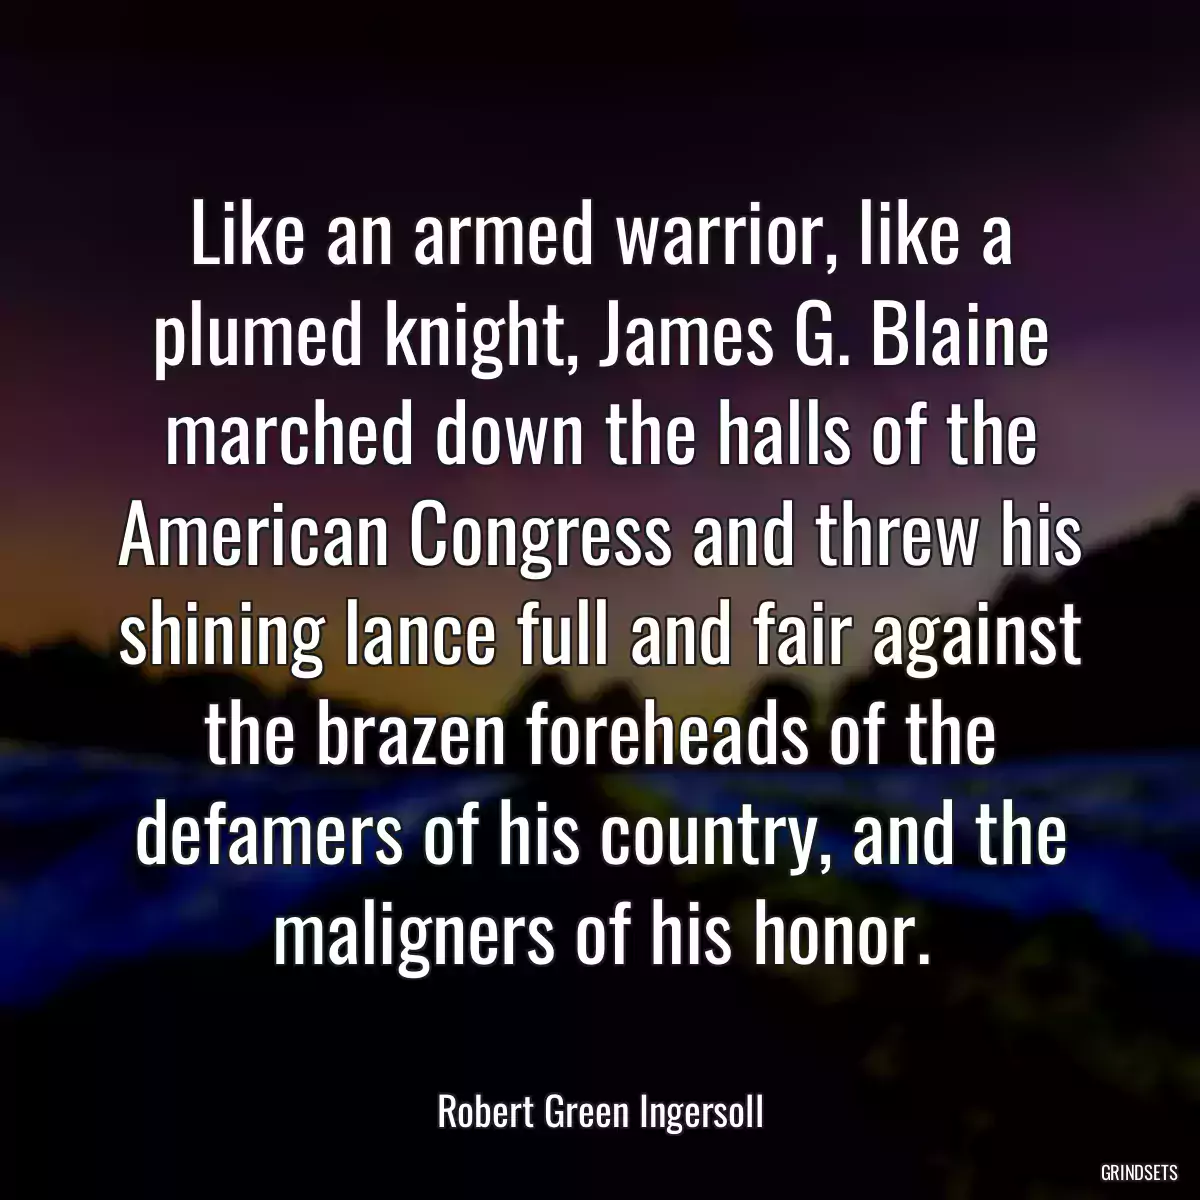 Like an armed warrior, like a plumed knight, James G. Blaine marched down the halls of the American Congress and threw his shining lance full and fair against the brazen foreheads of the defamers of his country, and the maligners of his honor.